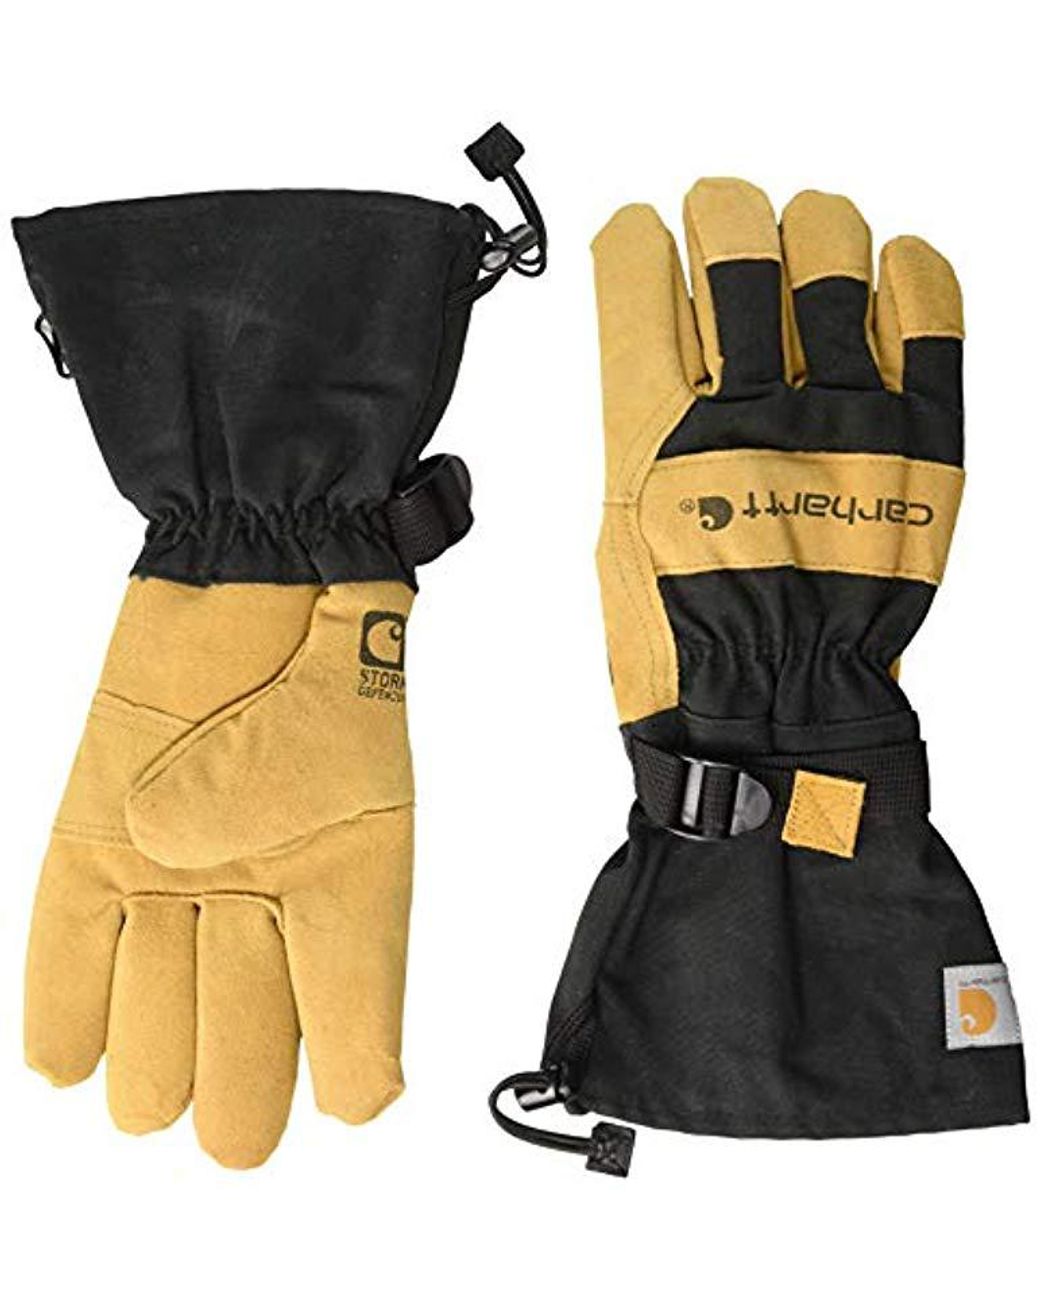 Carhartt Snowdrift Insulated Waterproof Work Gloves - Images Gloves and